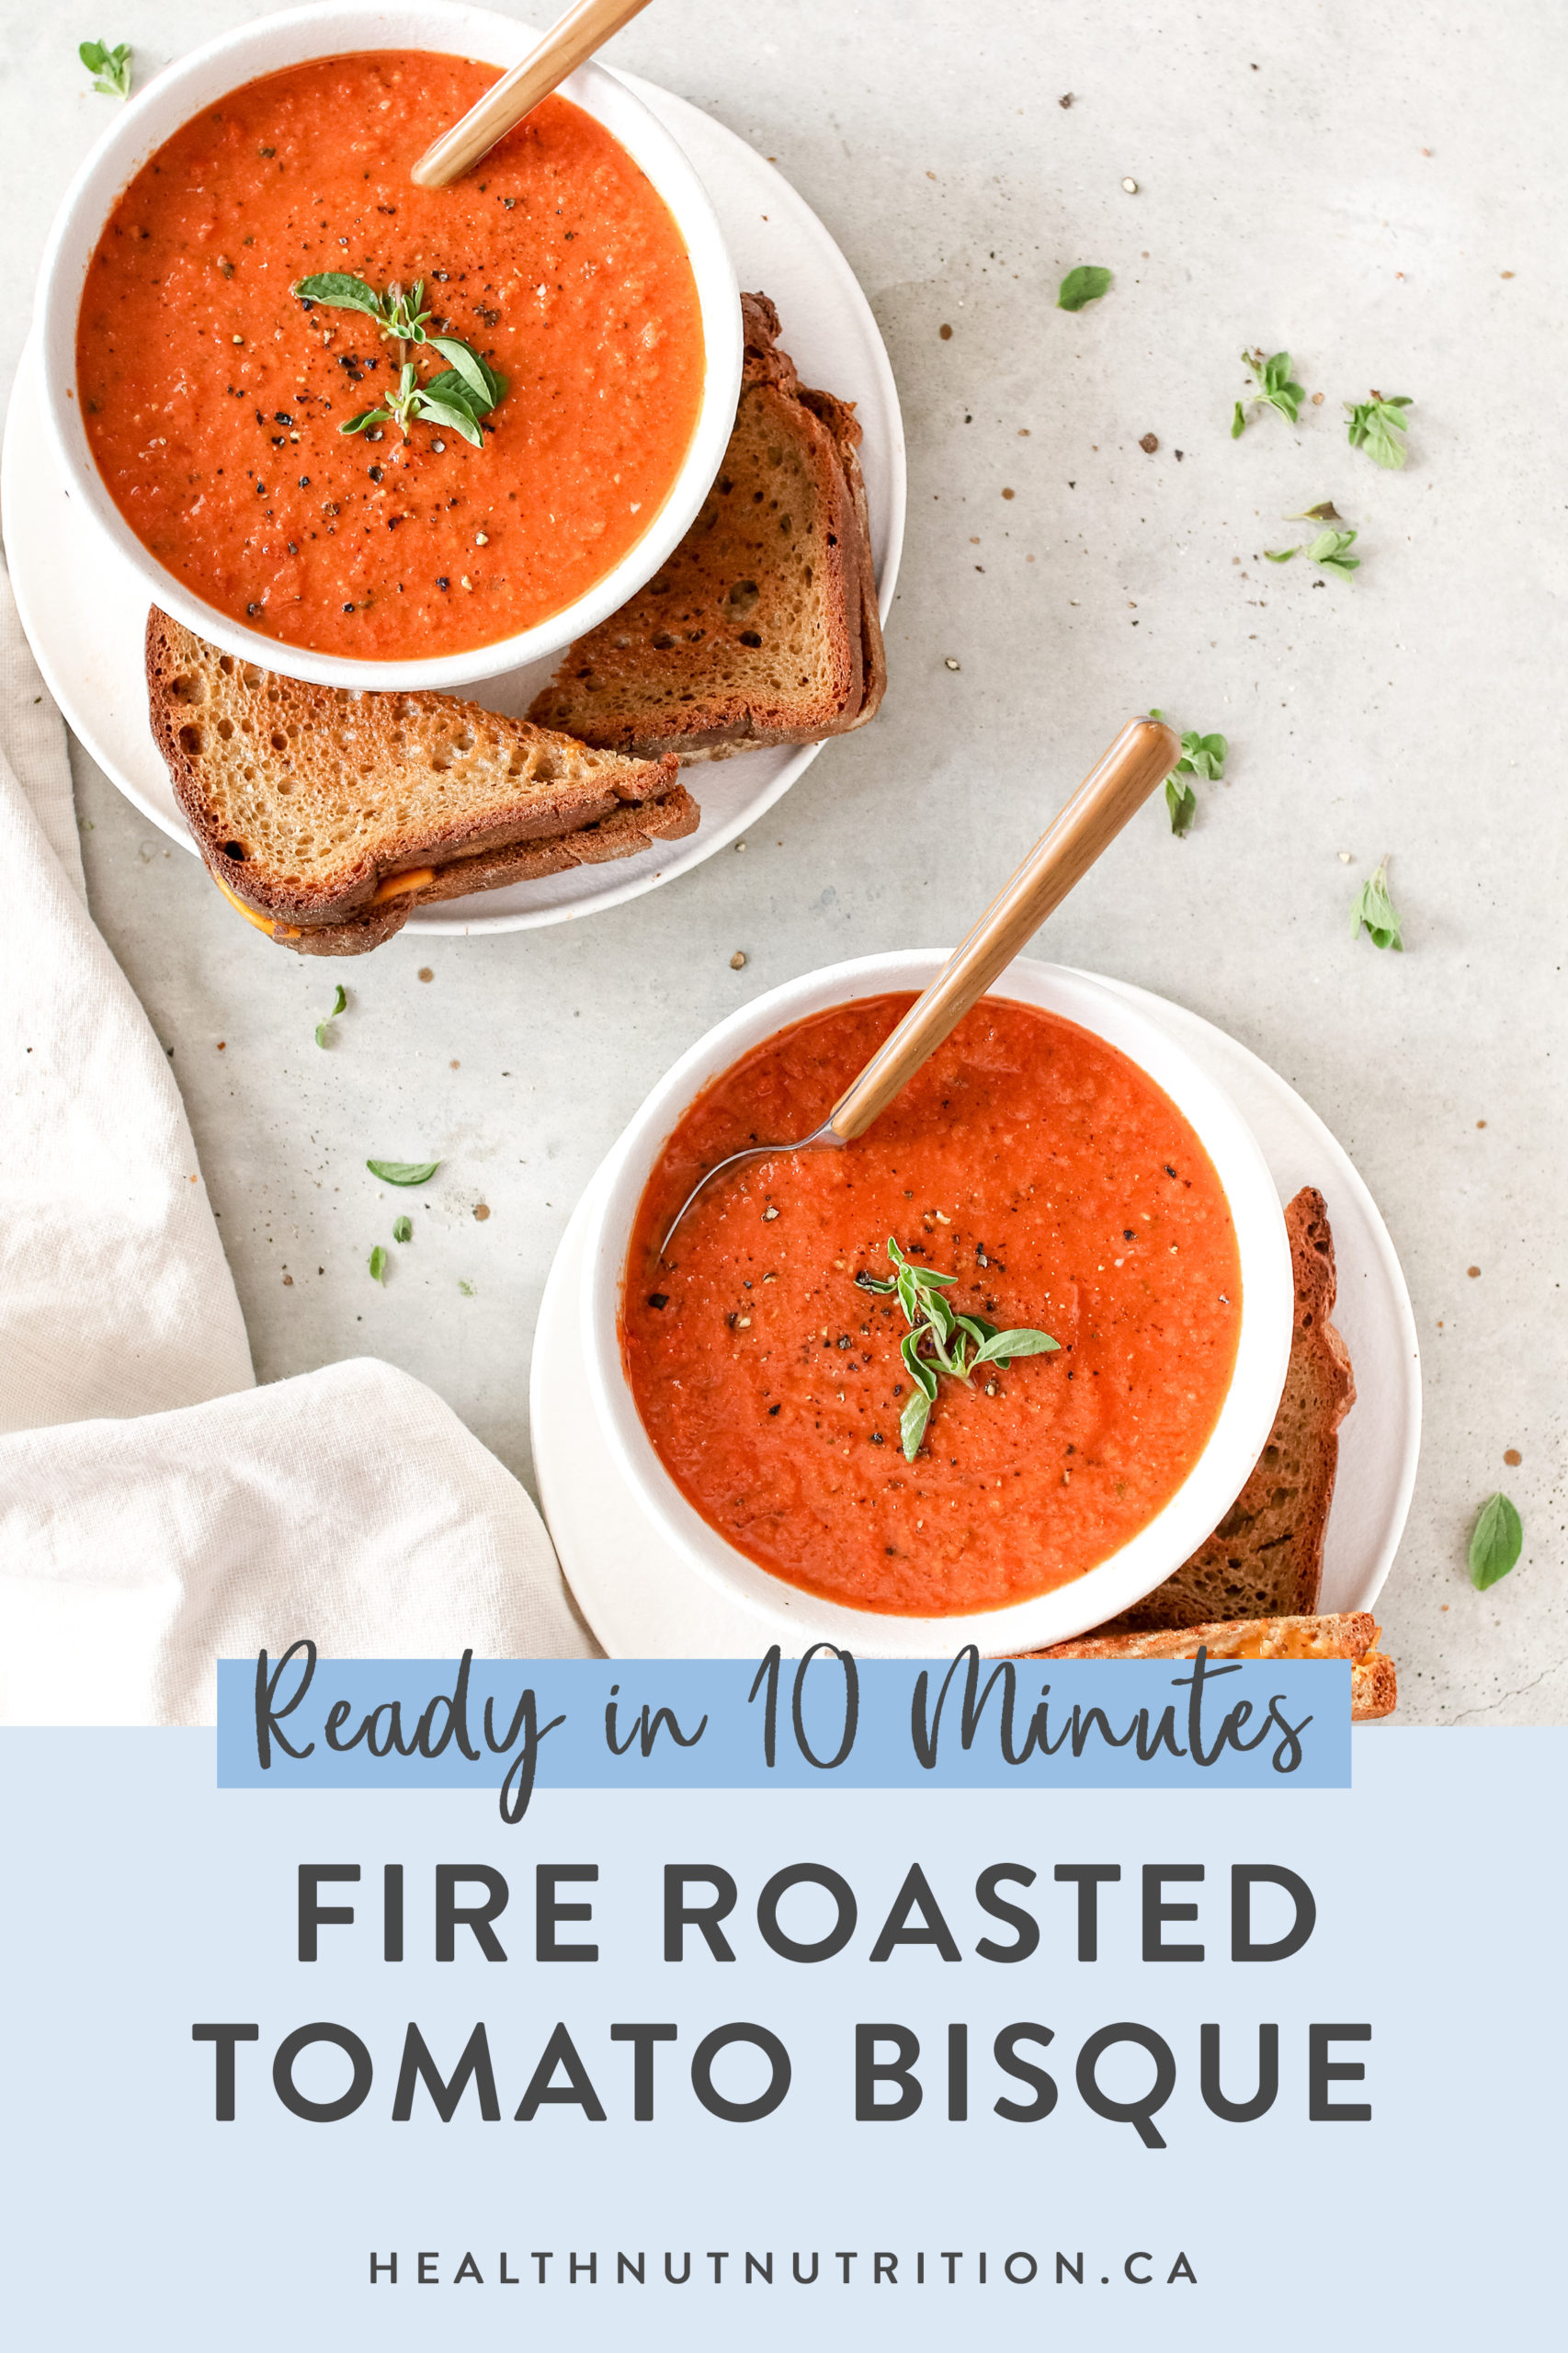 This Fire Roasted Tomato Bisque is creamy and so satisfying! It's made fire roasted tomatoes, packed full of flavour and ready in just 10 minutes!